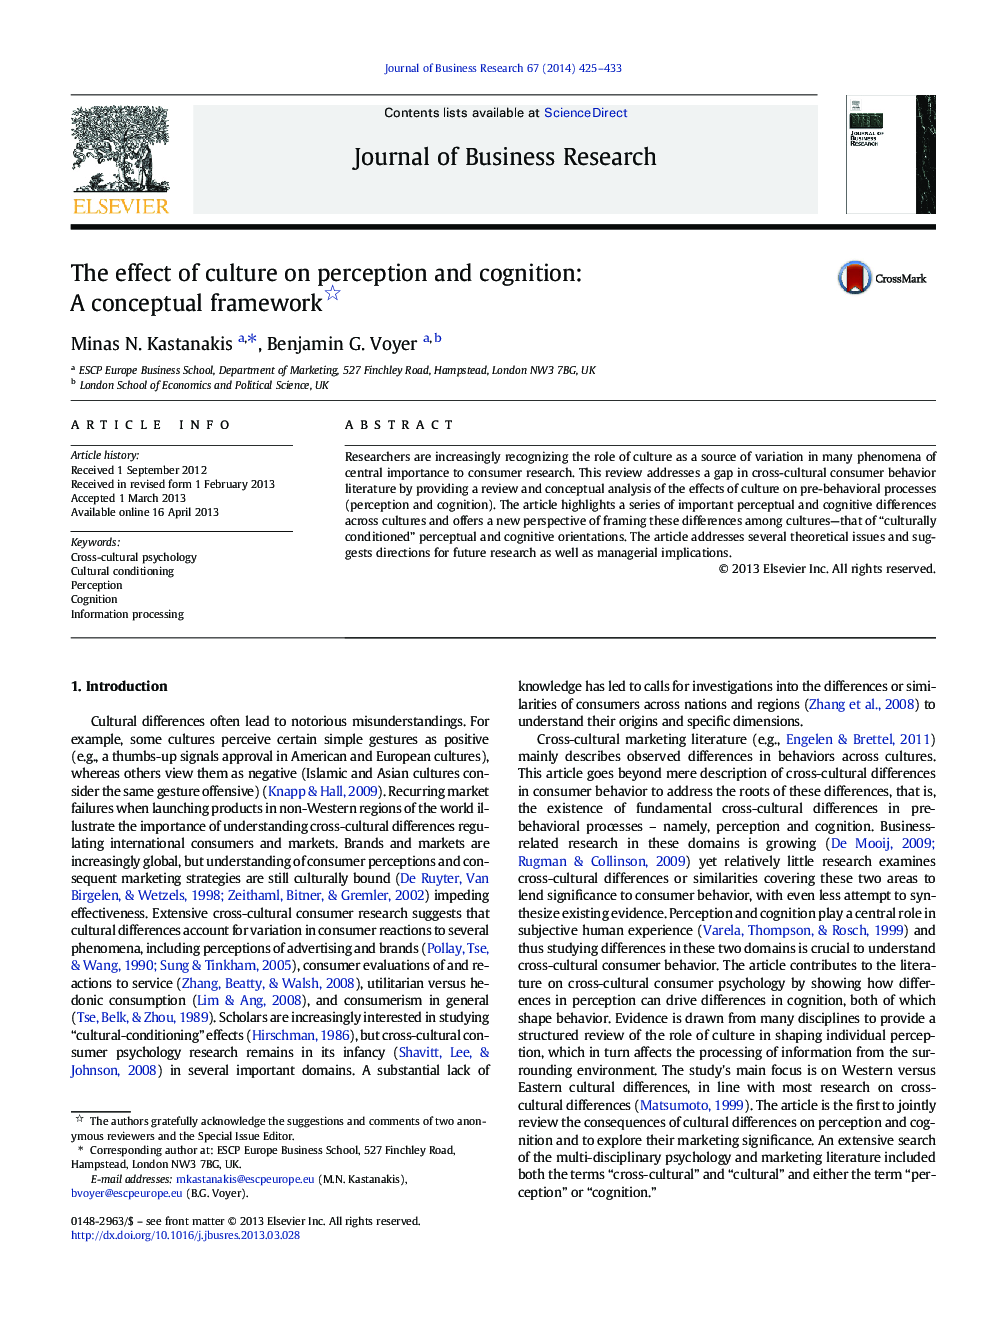 The effect of culture on perception and cognition: A conceptual framework 